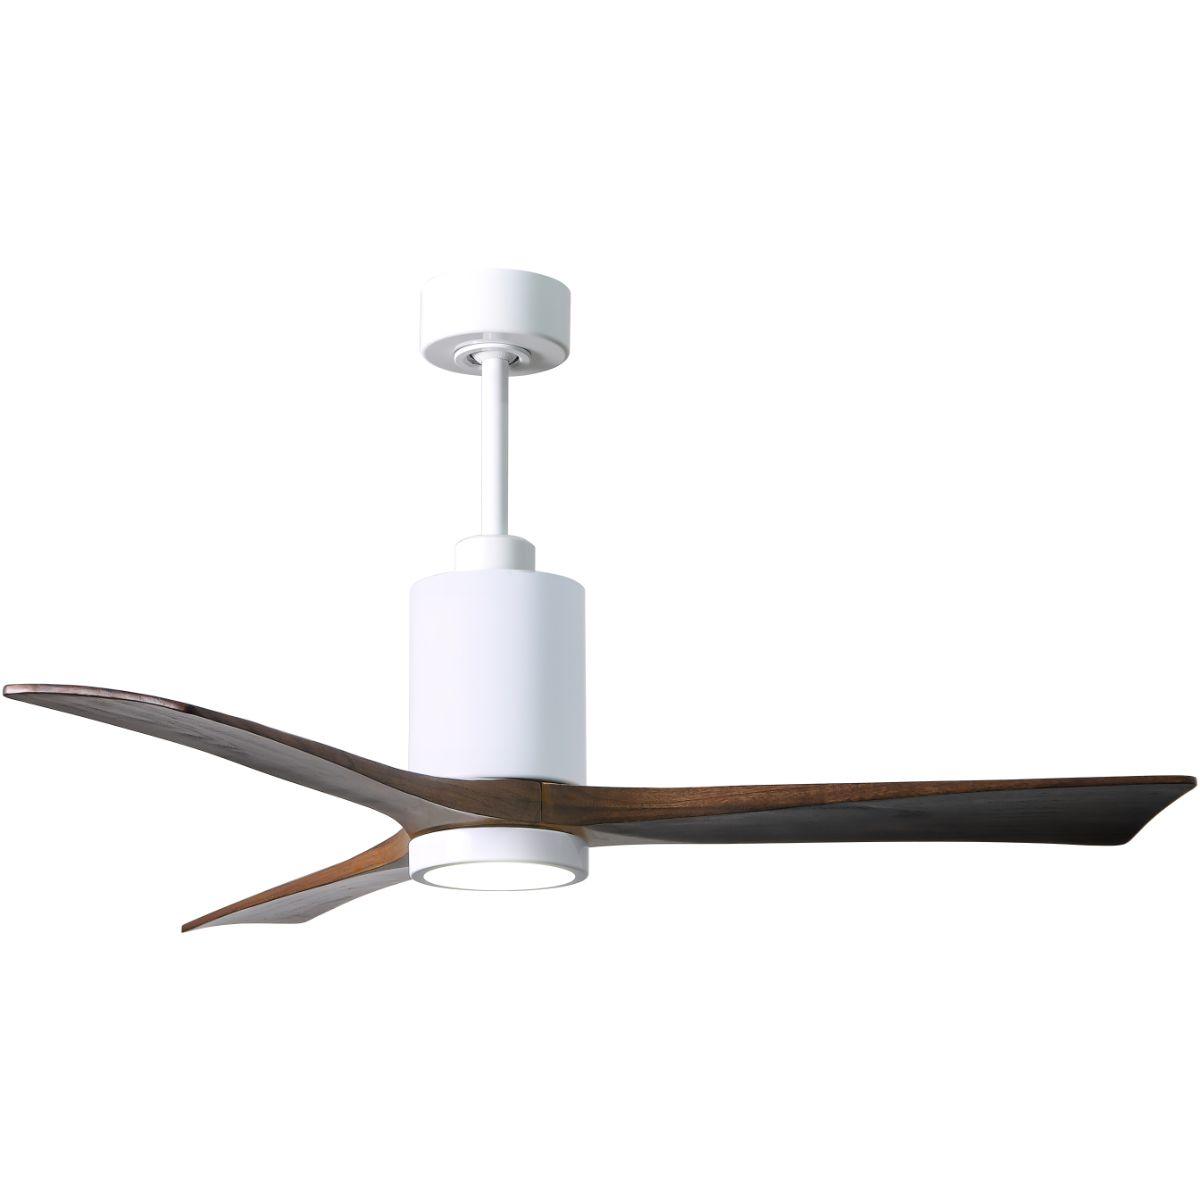 Patricia 52 Inch 3 Blades Modern Outdoor Ceiling Fan With Light, Wall And Remote Control Included